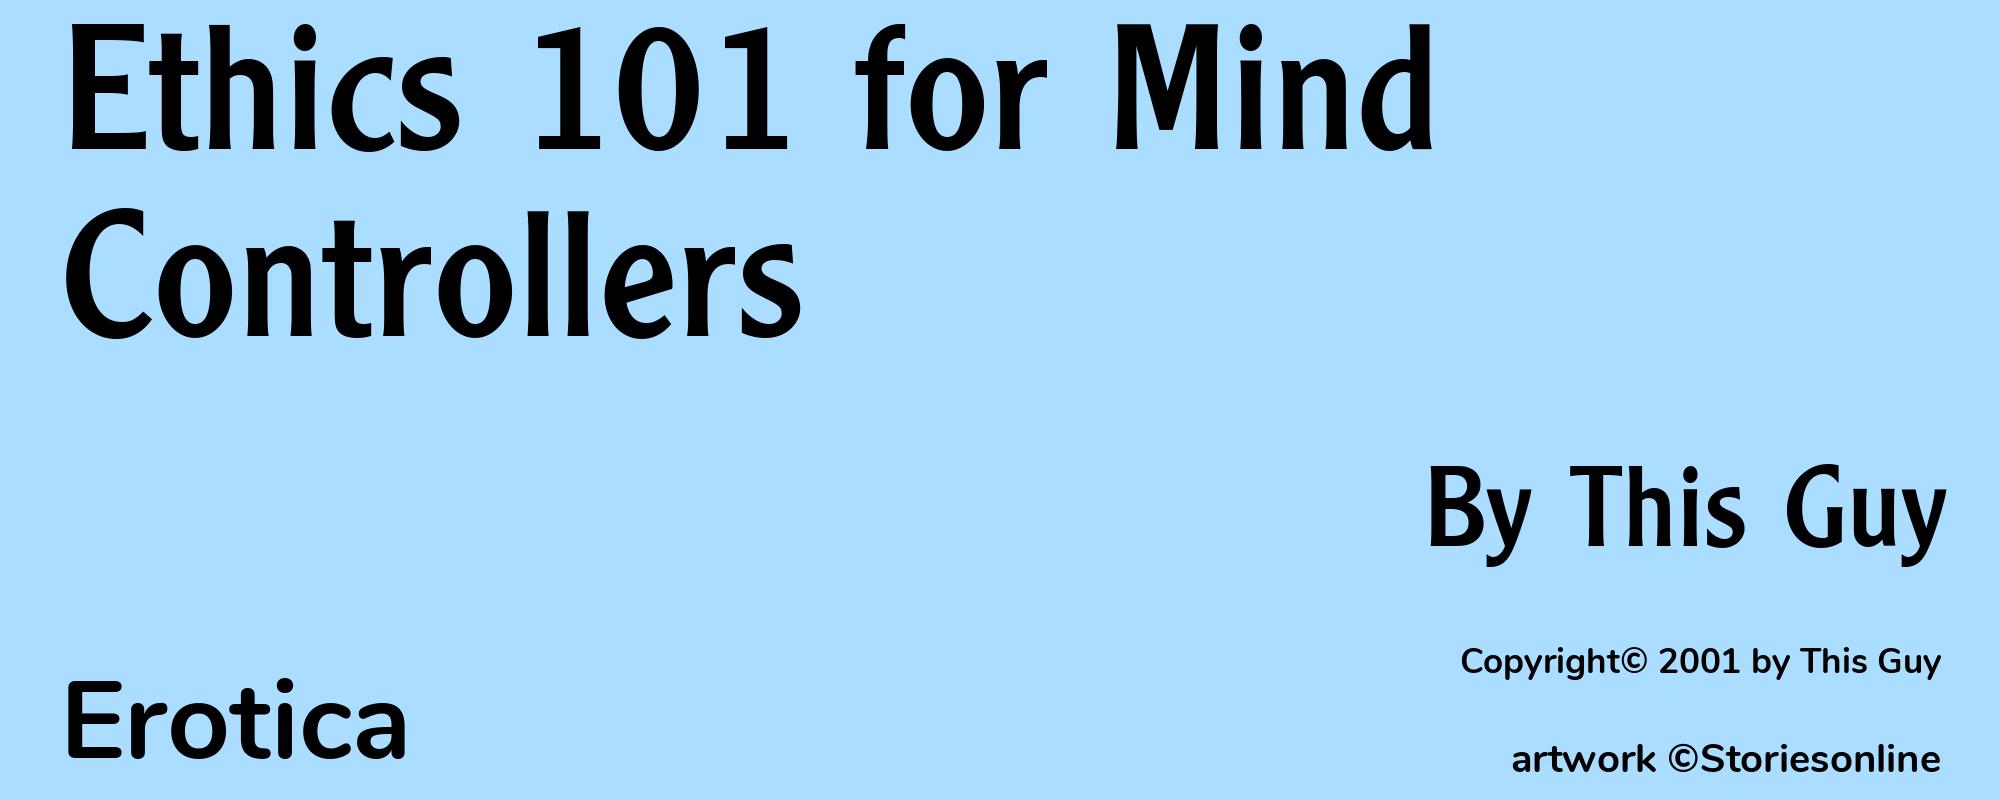 Ethics 101 for Mind Controllers - Cover